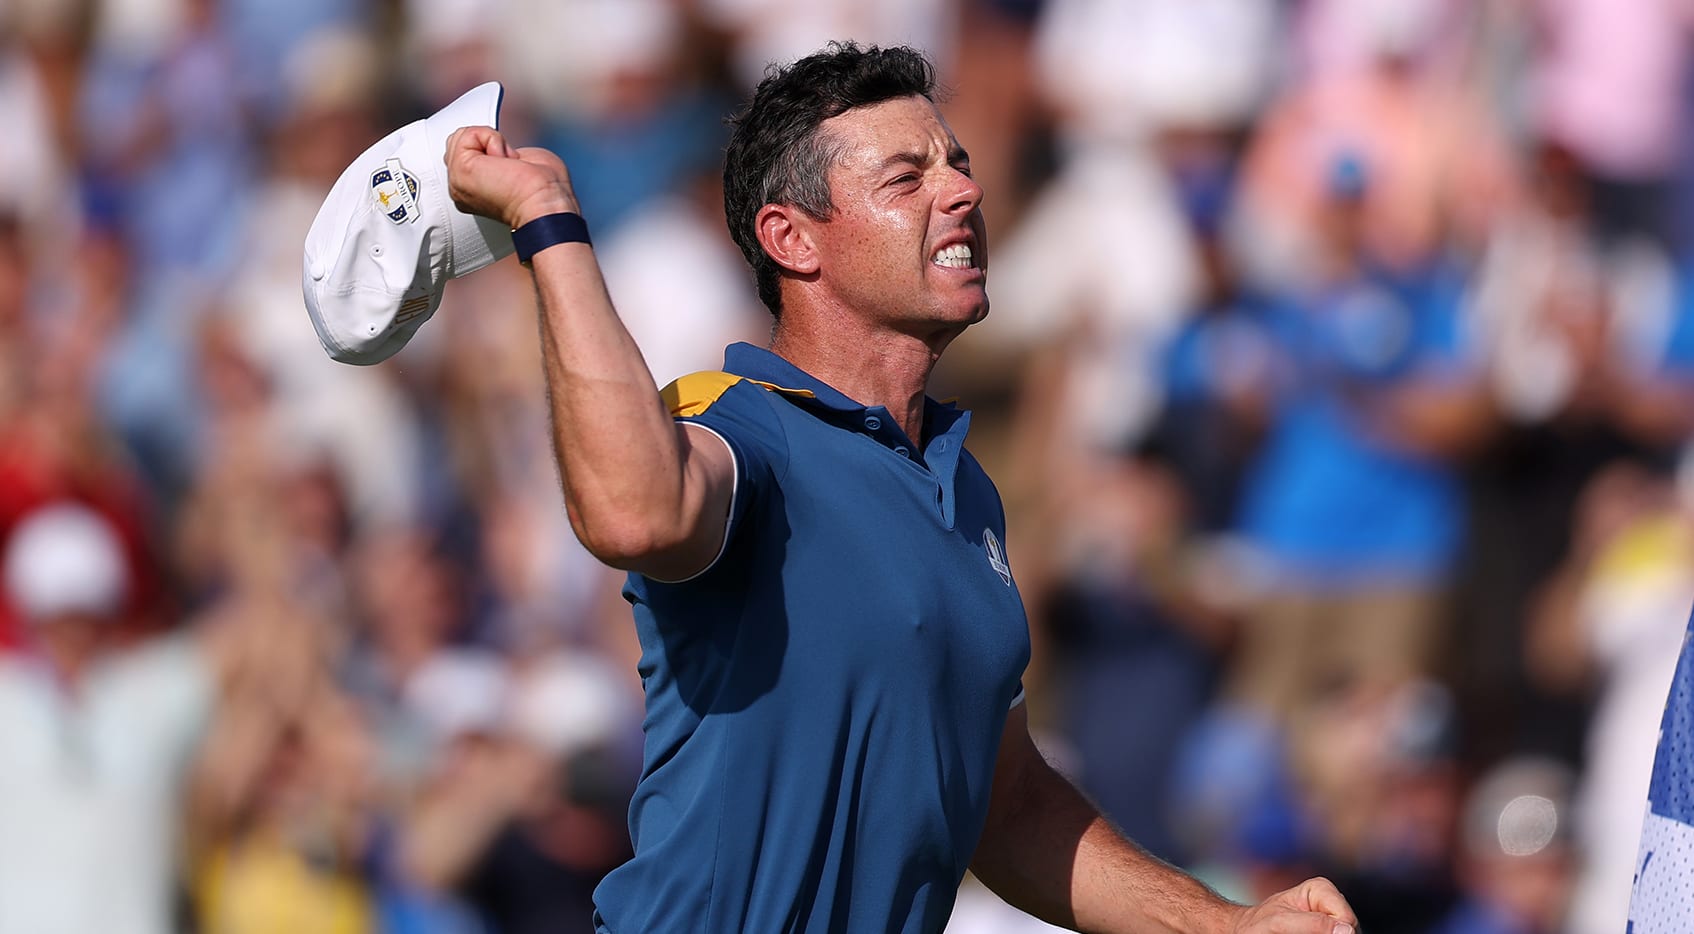 Rory McIlroy proves himself to be the heartbeat of this Ryder Cup PGA